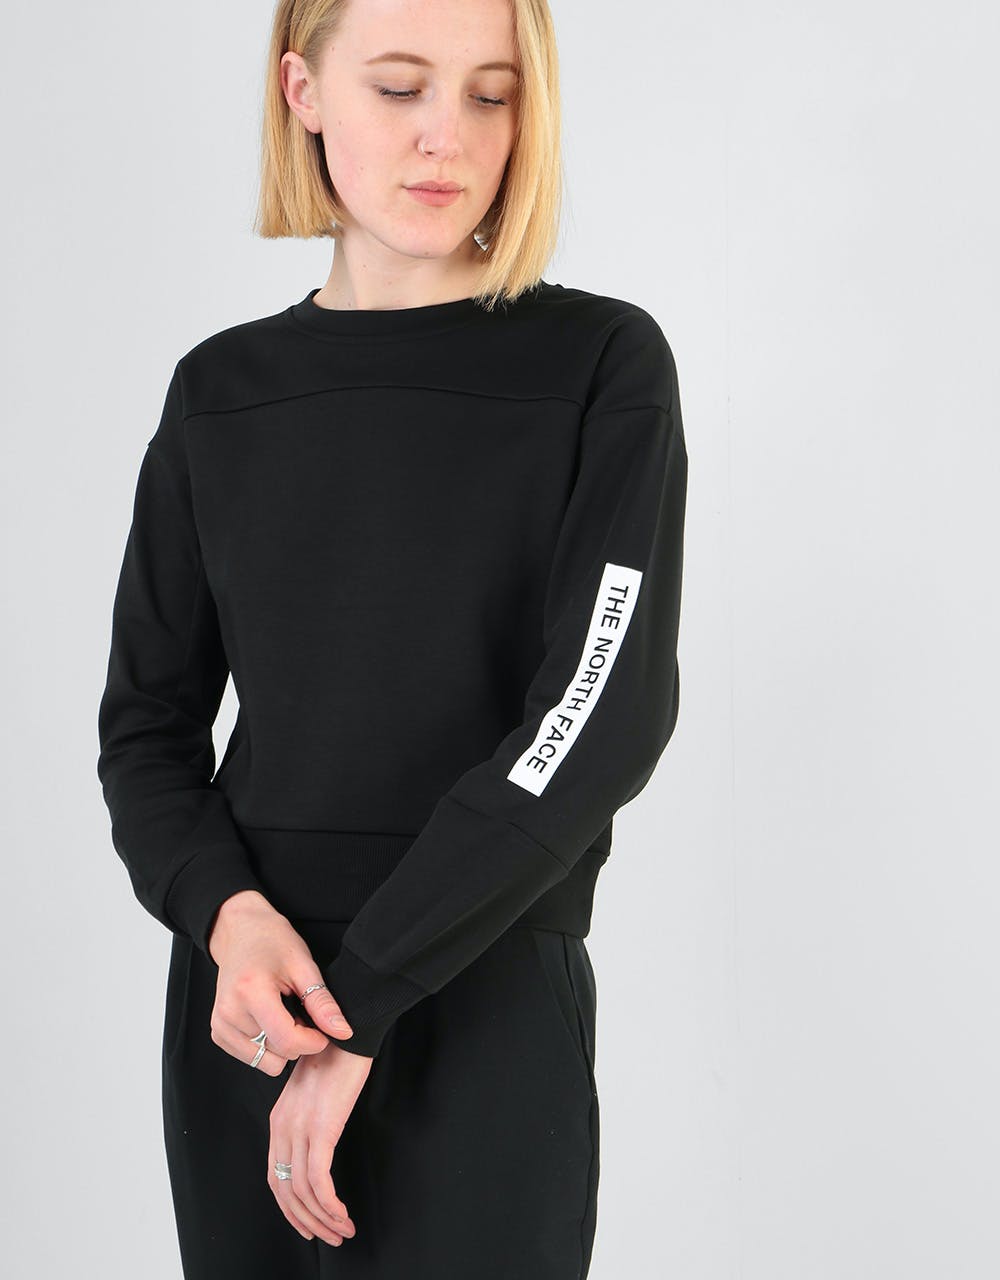 The North Face Womens Light Cropped Sweat - TNF Black